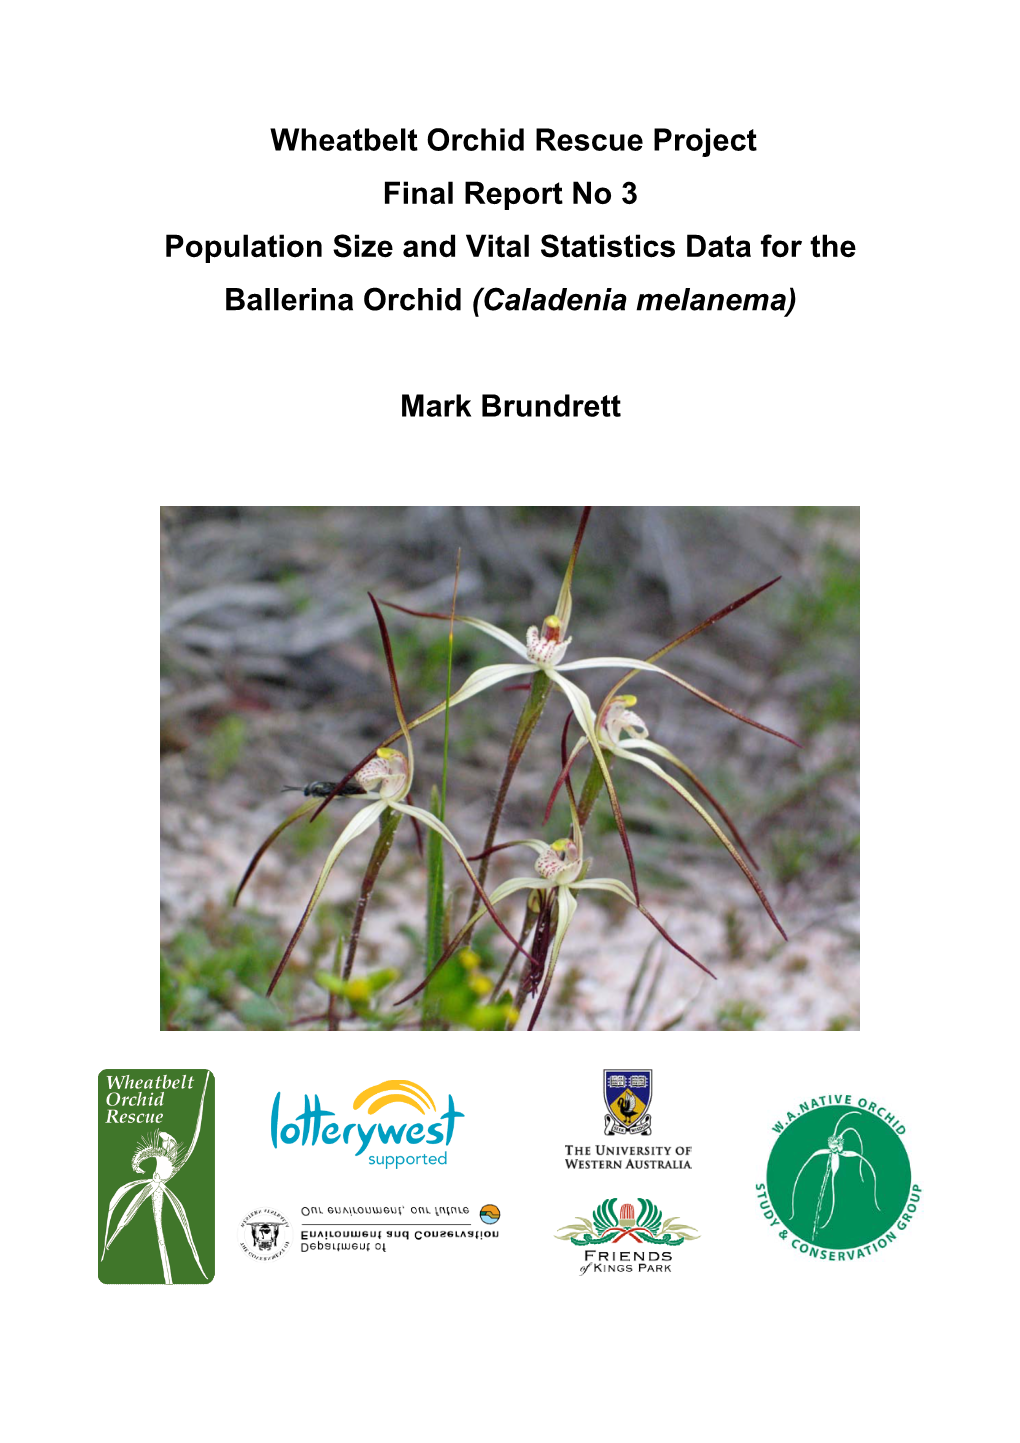 Wheatbelt Orchid Rescue Project Final Report No 3 Population Size and Vital Statistics Data for the Ballerina Orchid (Caladenia Melanema)